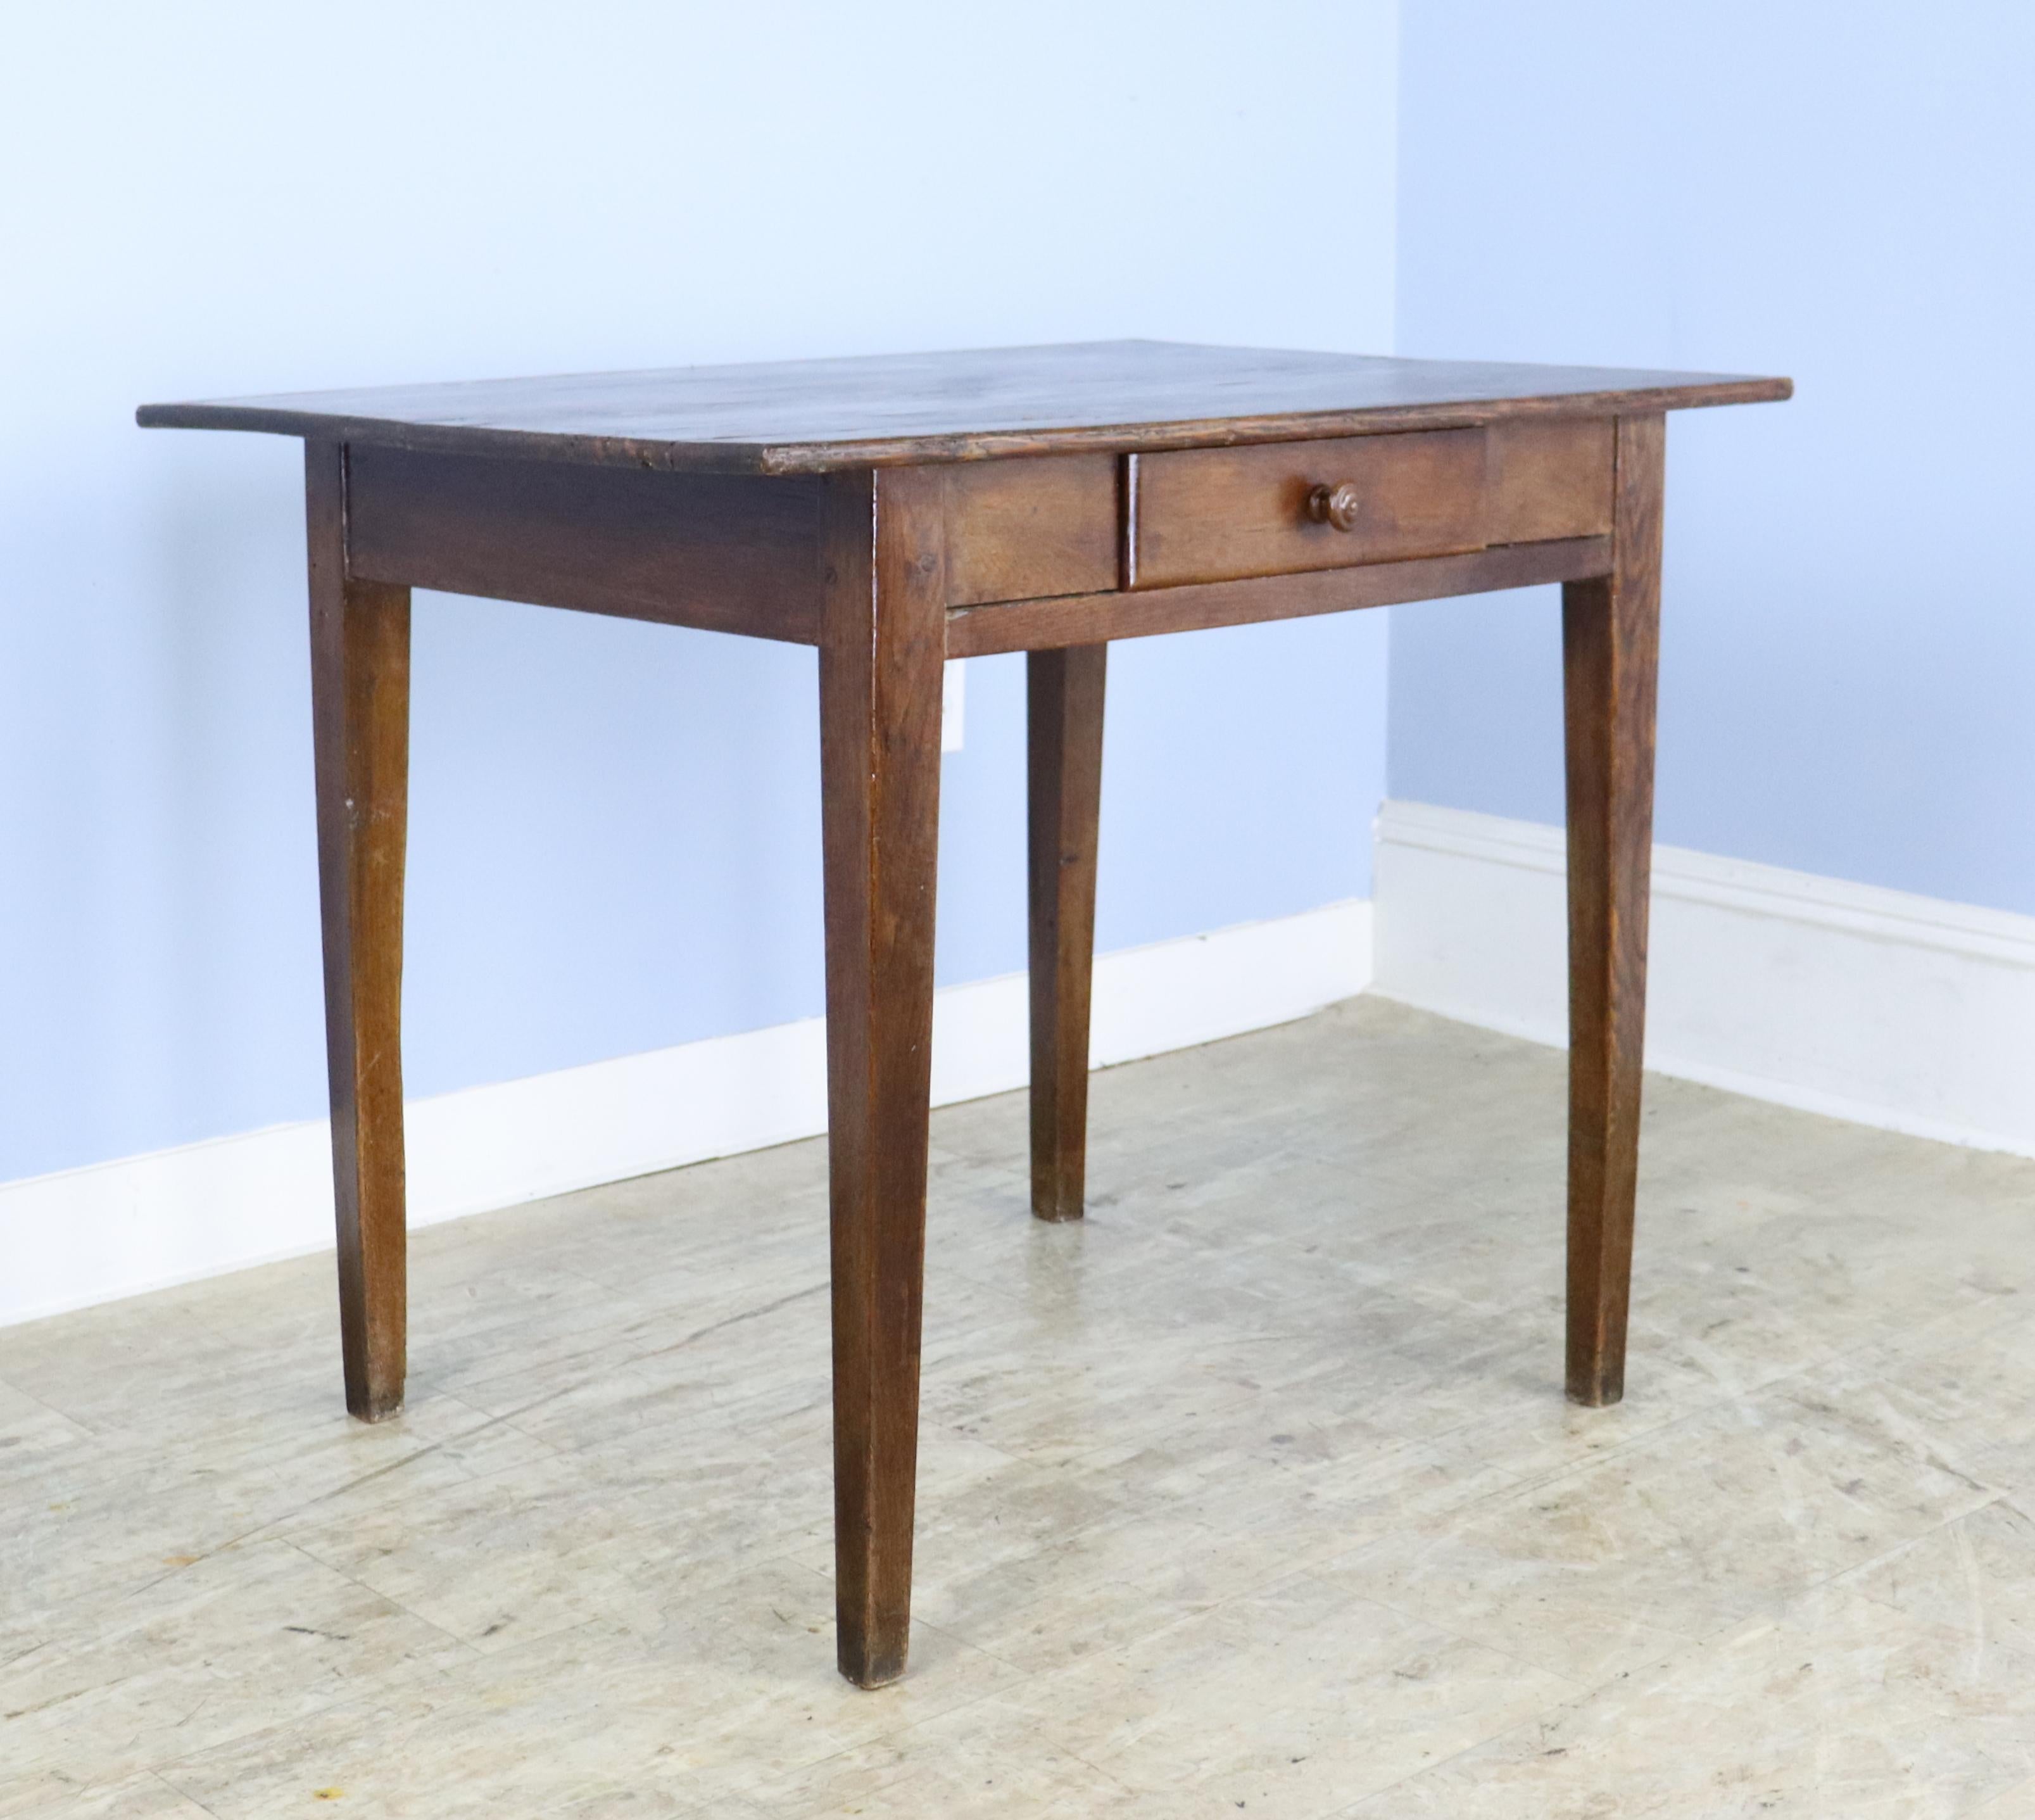 A side table with a pine top and oak base. It has a very simple silhouette, and with an almost 24